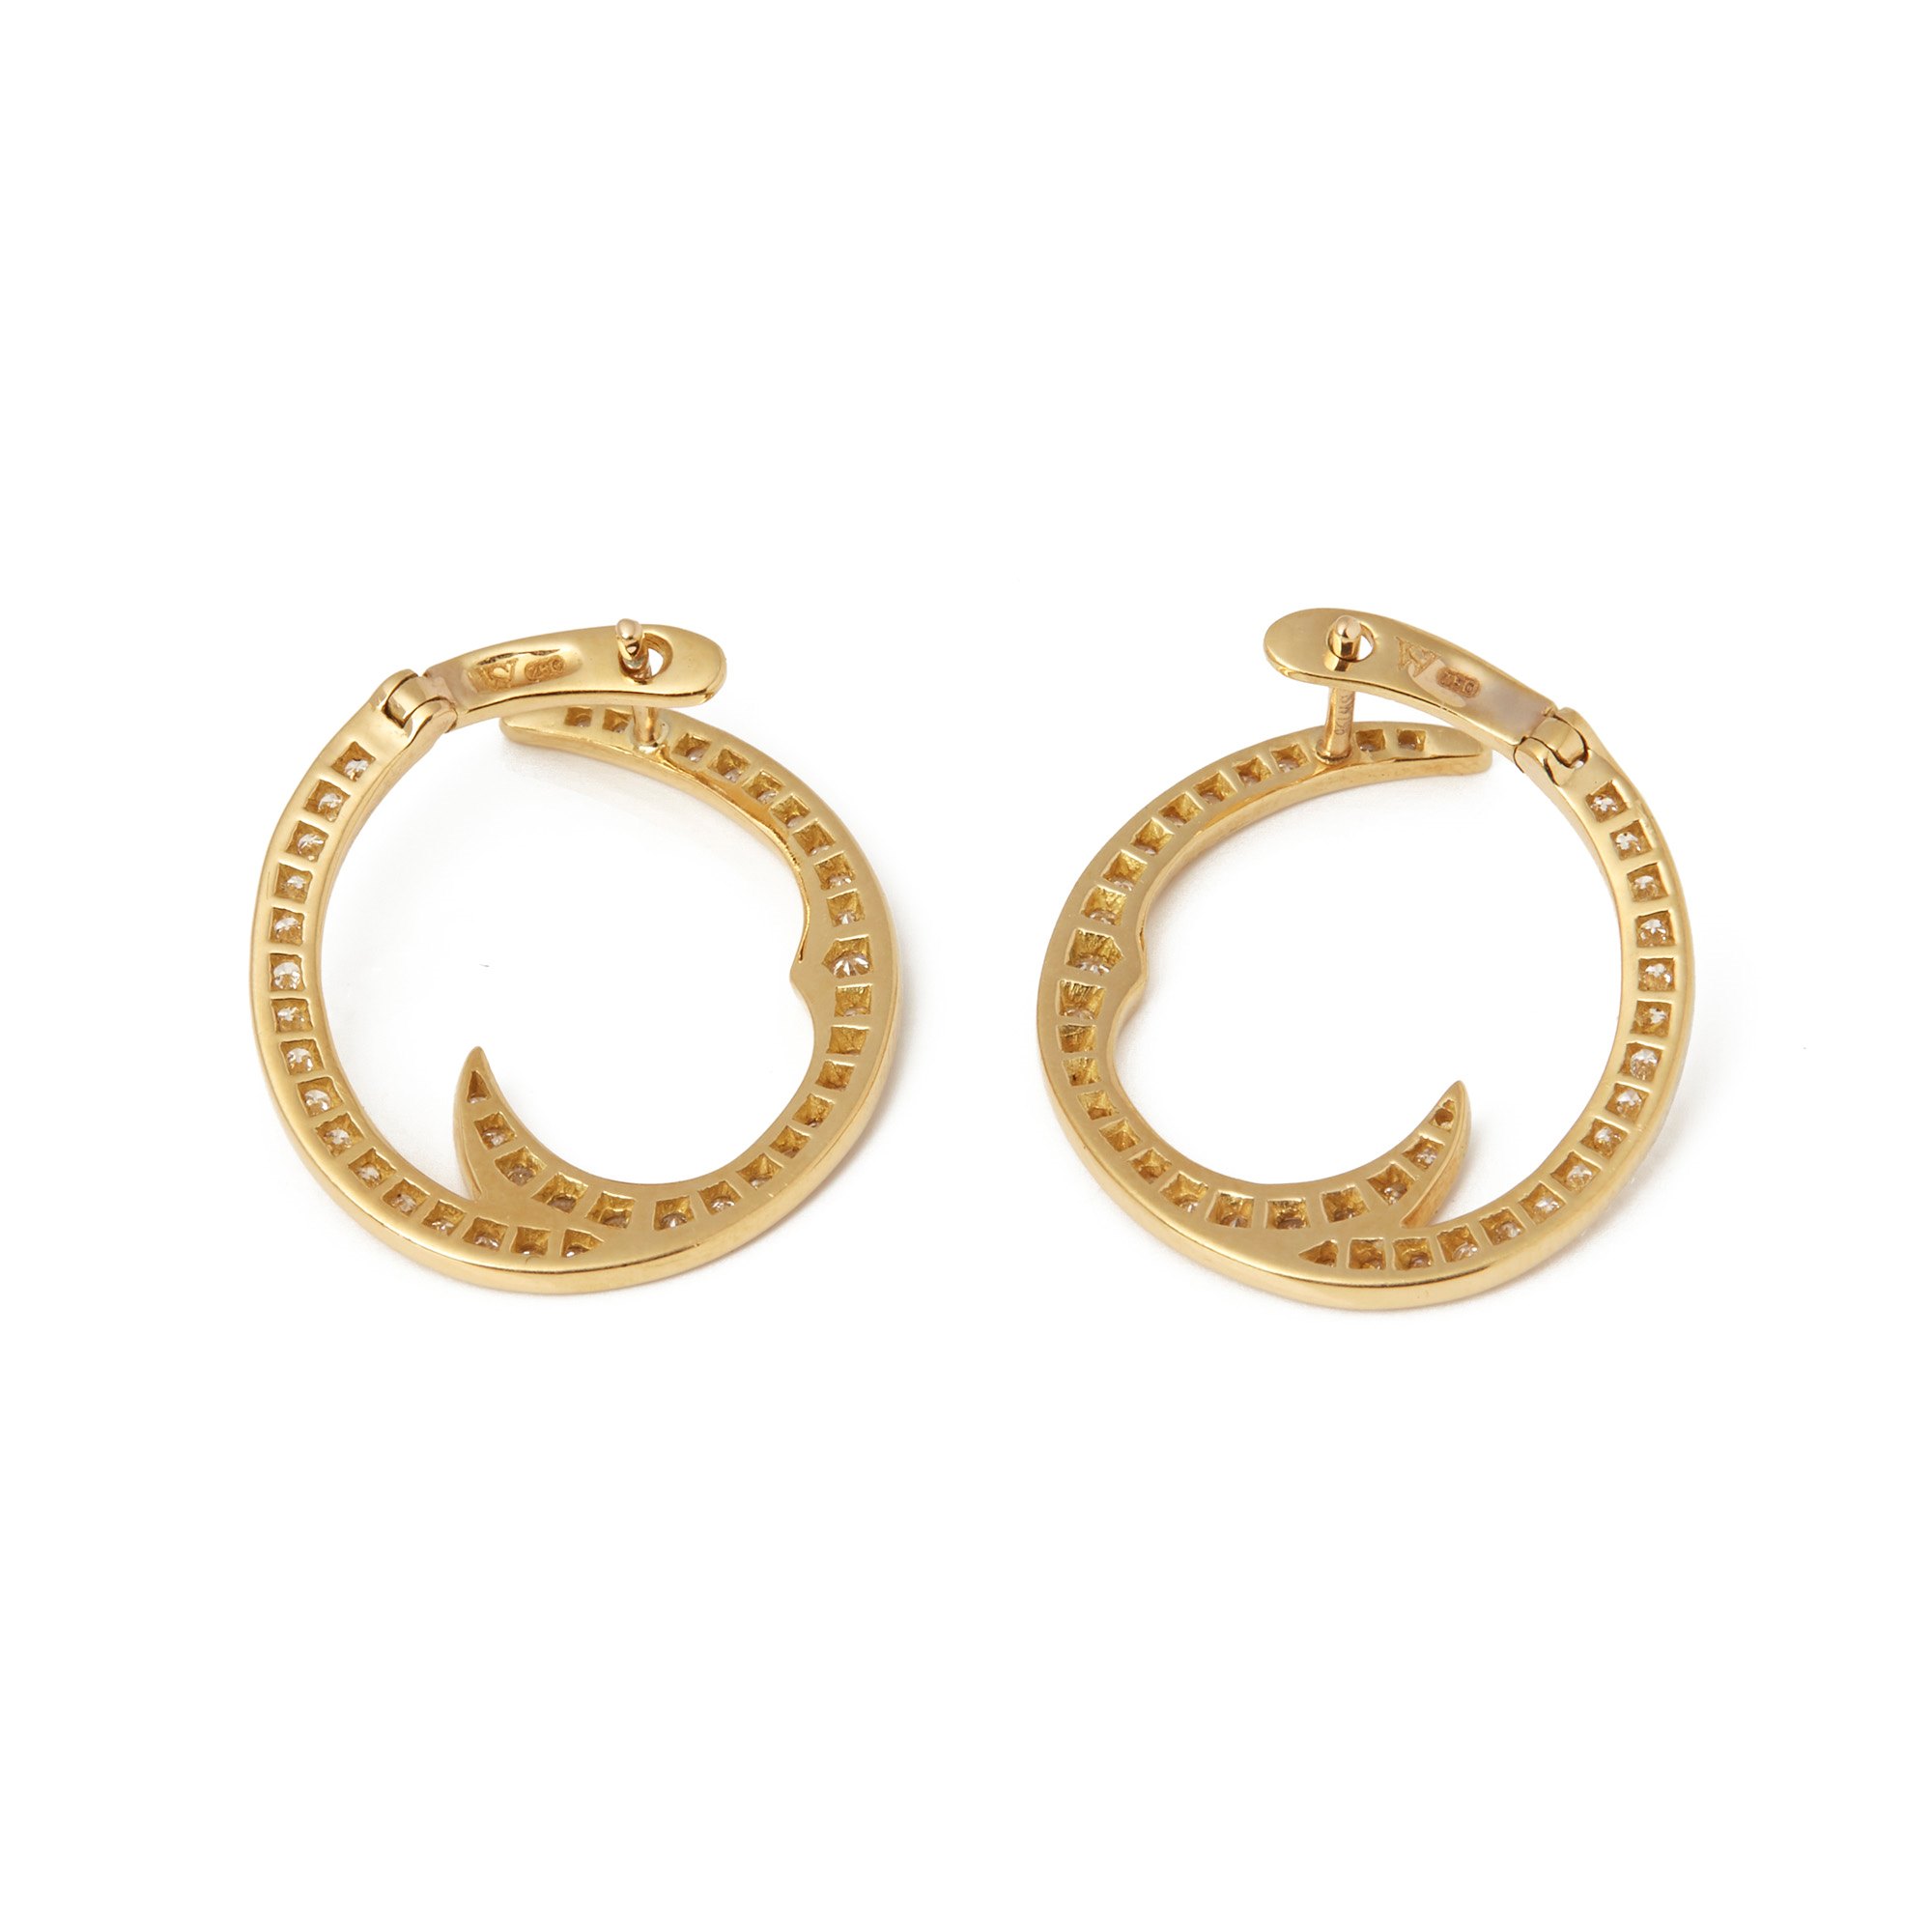 Stephen Webster Thorn 18ct Yellow Gold Pave Diamond Earrings